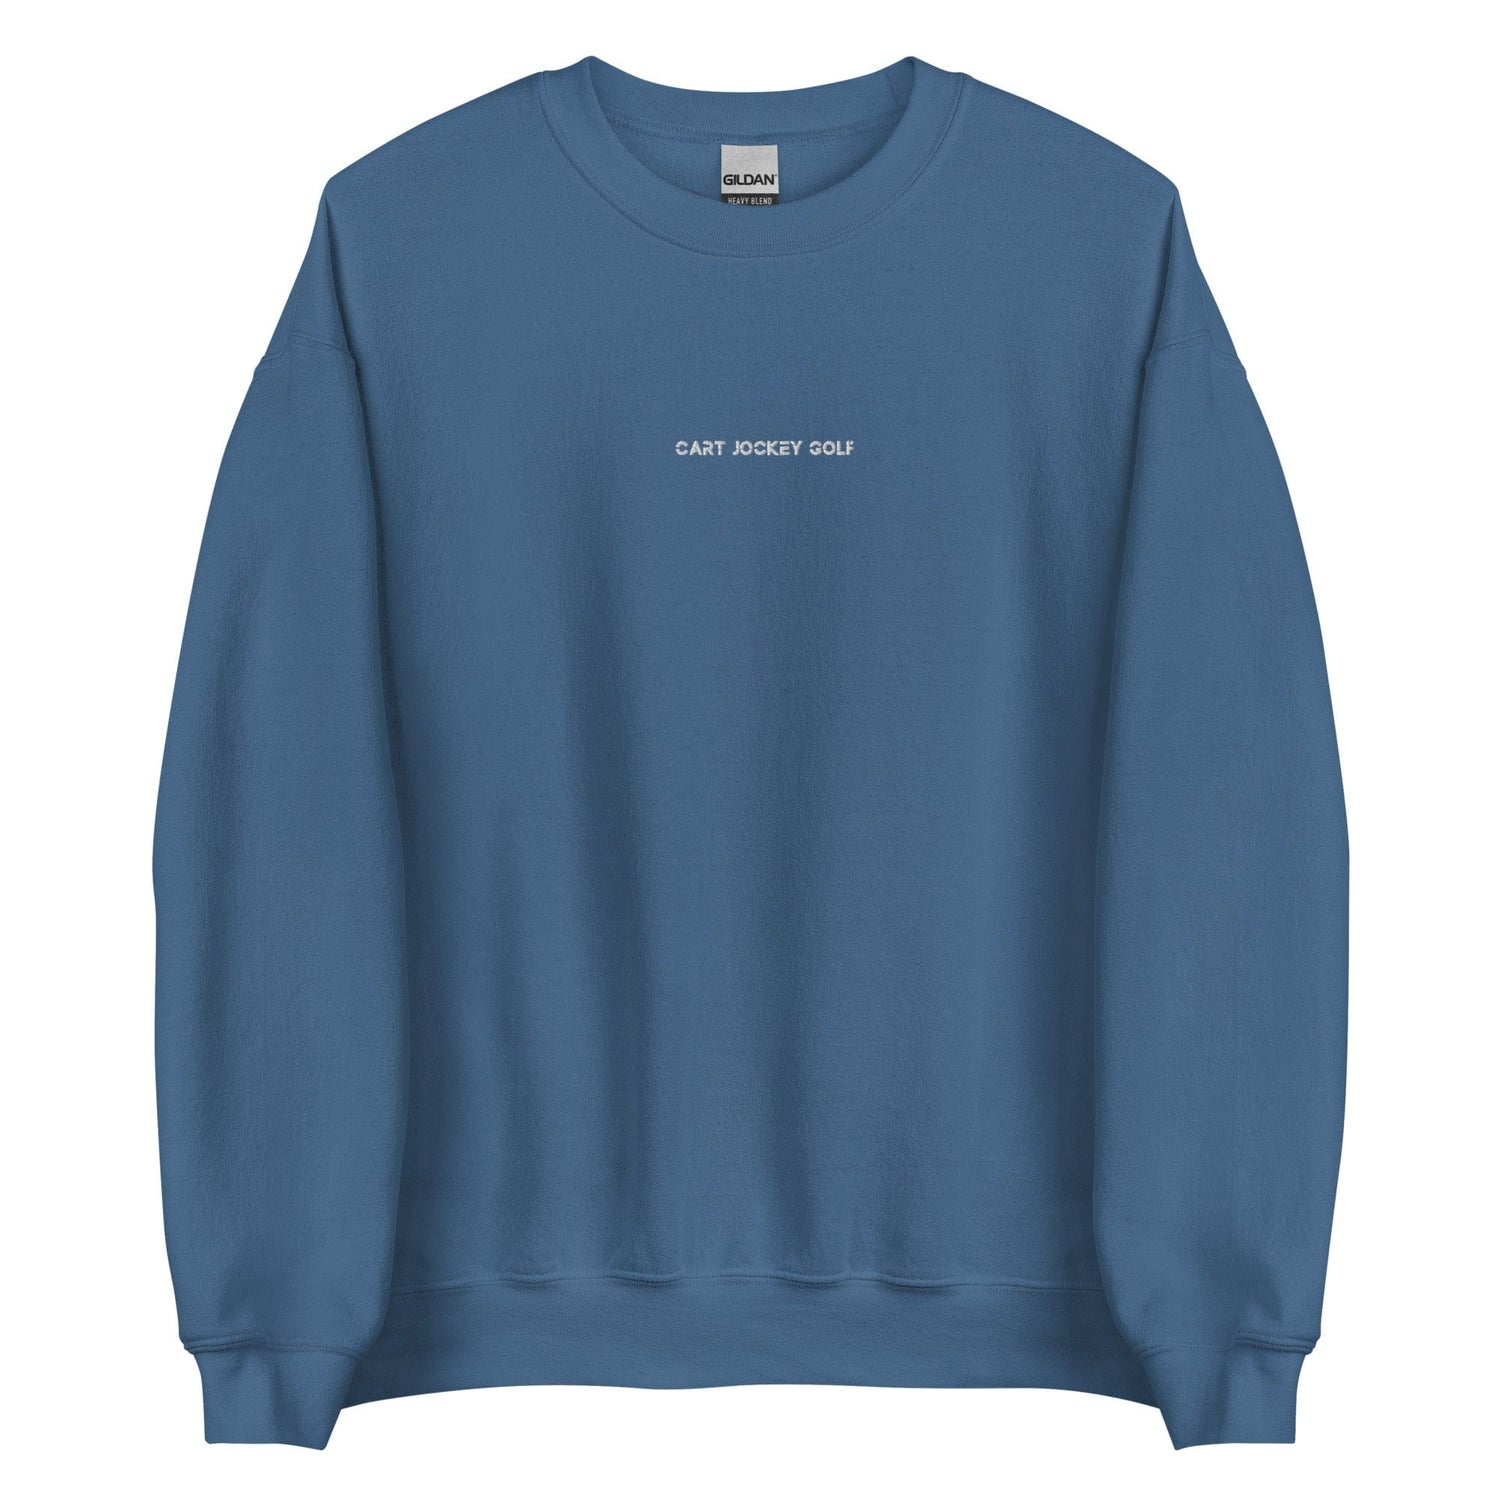 A Cart Jockey Golf Simple Embroidered Crewneck with a white logo on it.